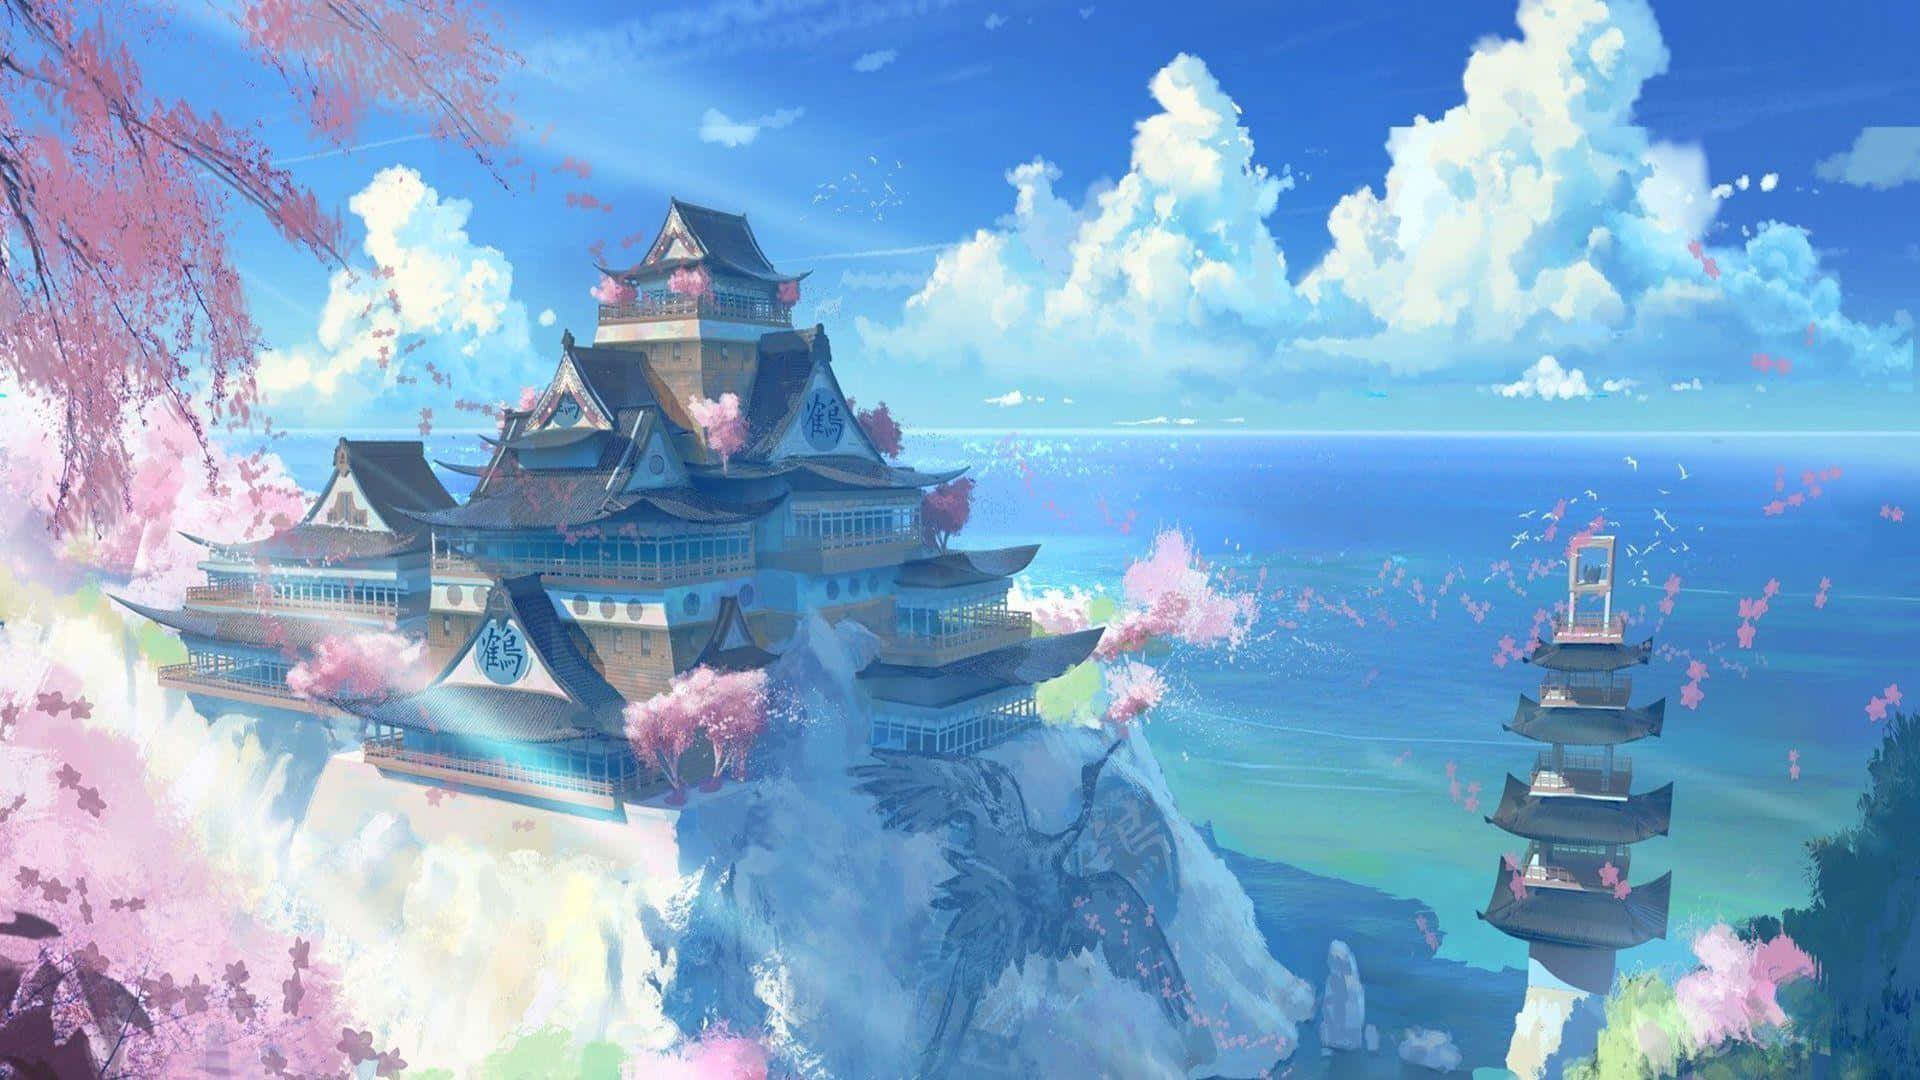 A Beautiful Anime Scenery Full Of Colorful Things And Imagination